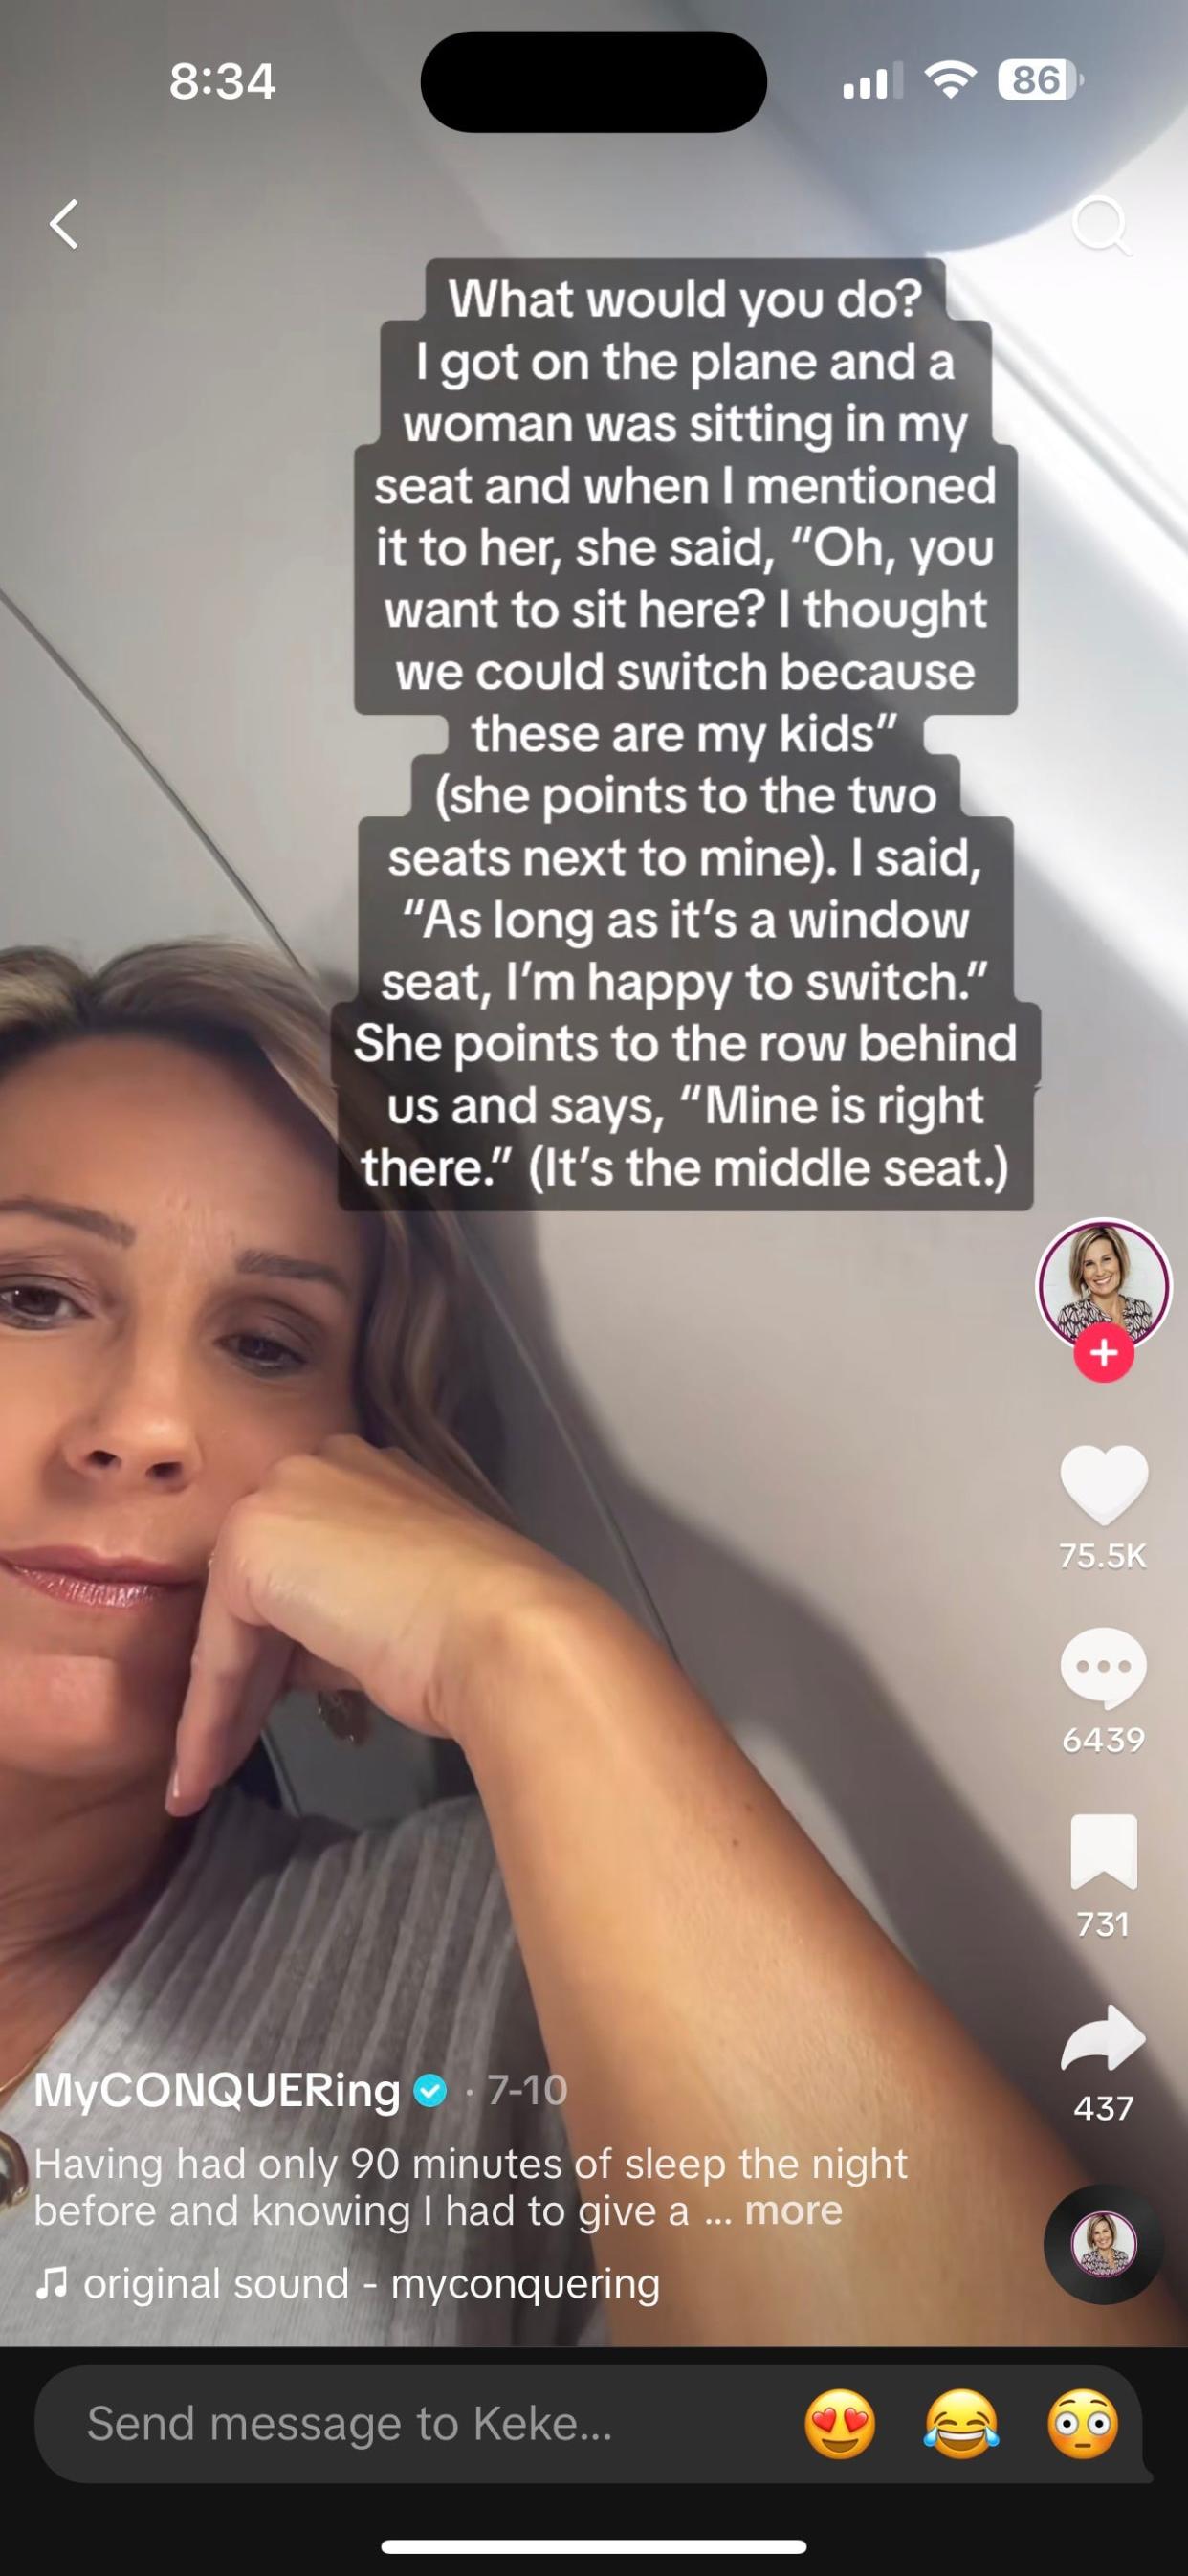 Tammy Nelson, CEO of global jewelry brand Conquering, posted a video on TikTok July 10, sharing a recent experience in which she refused to switch seats with another passenger on an airplane.